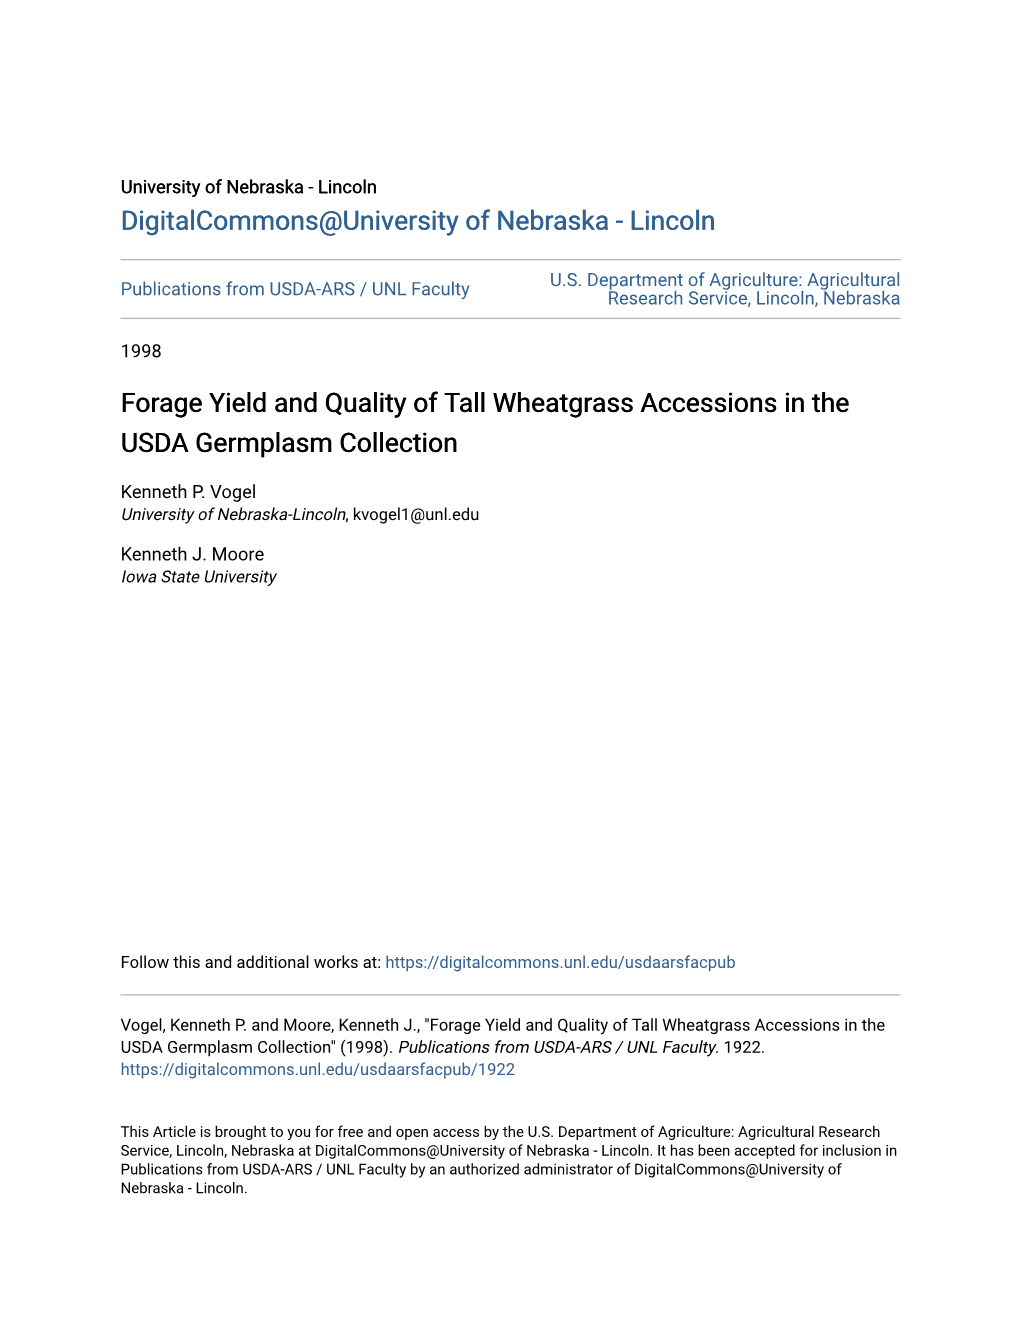 Forage Yield and Quality of Tall Wheatgrass Accessions in the USDA Germplasm Collection